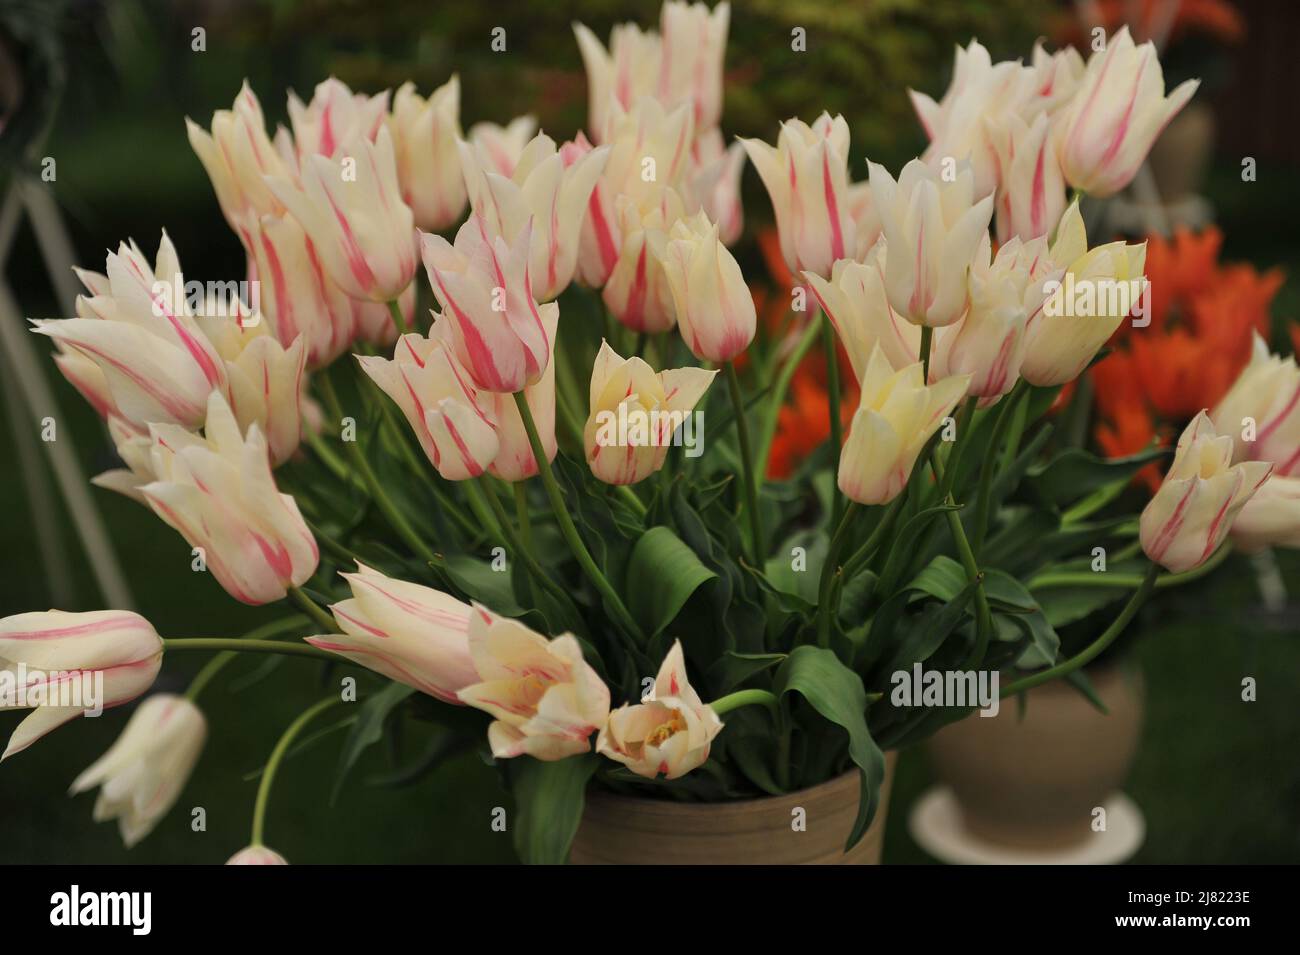 A bouquet of white and pink lily-flowered tulips (Tulipa) Marilyn on an exhibition in May Stock Photo